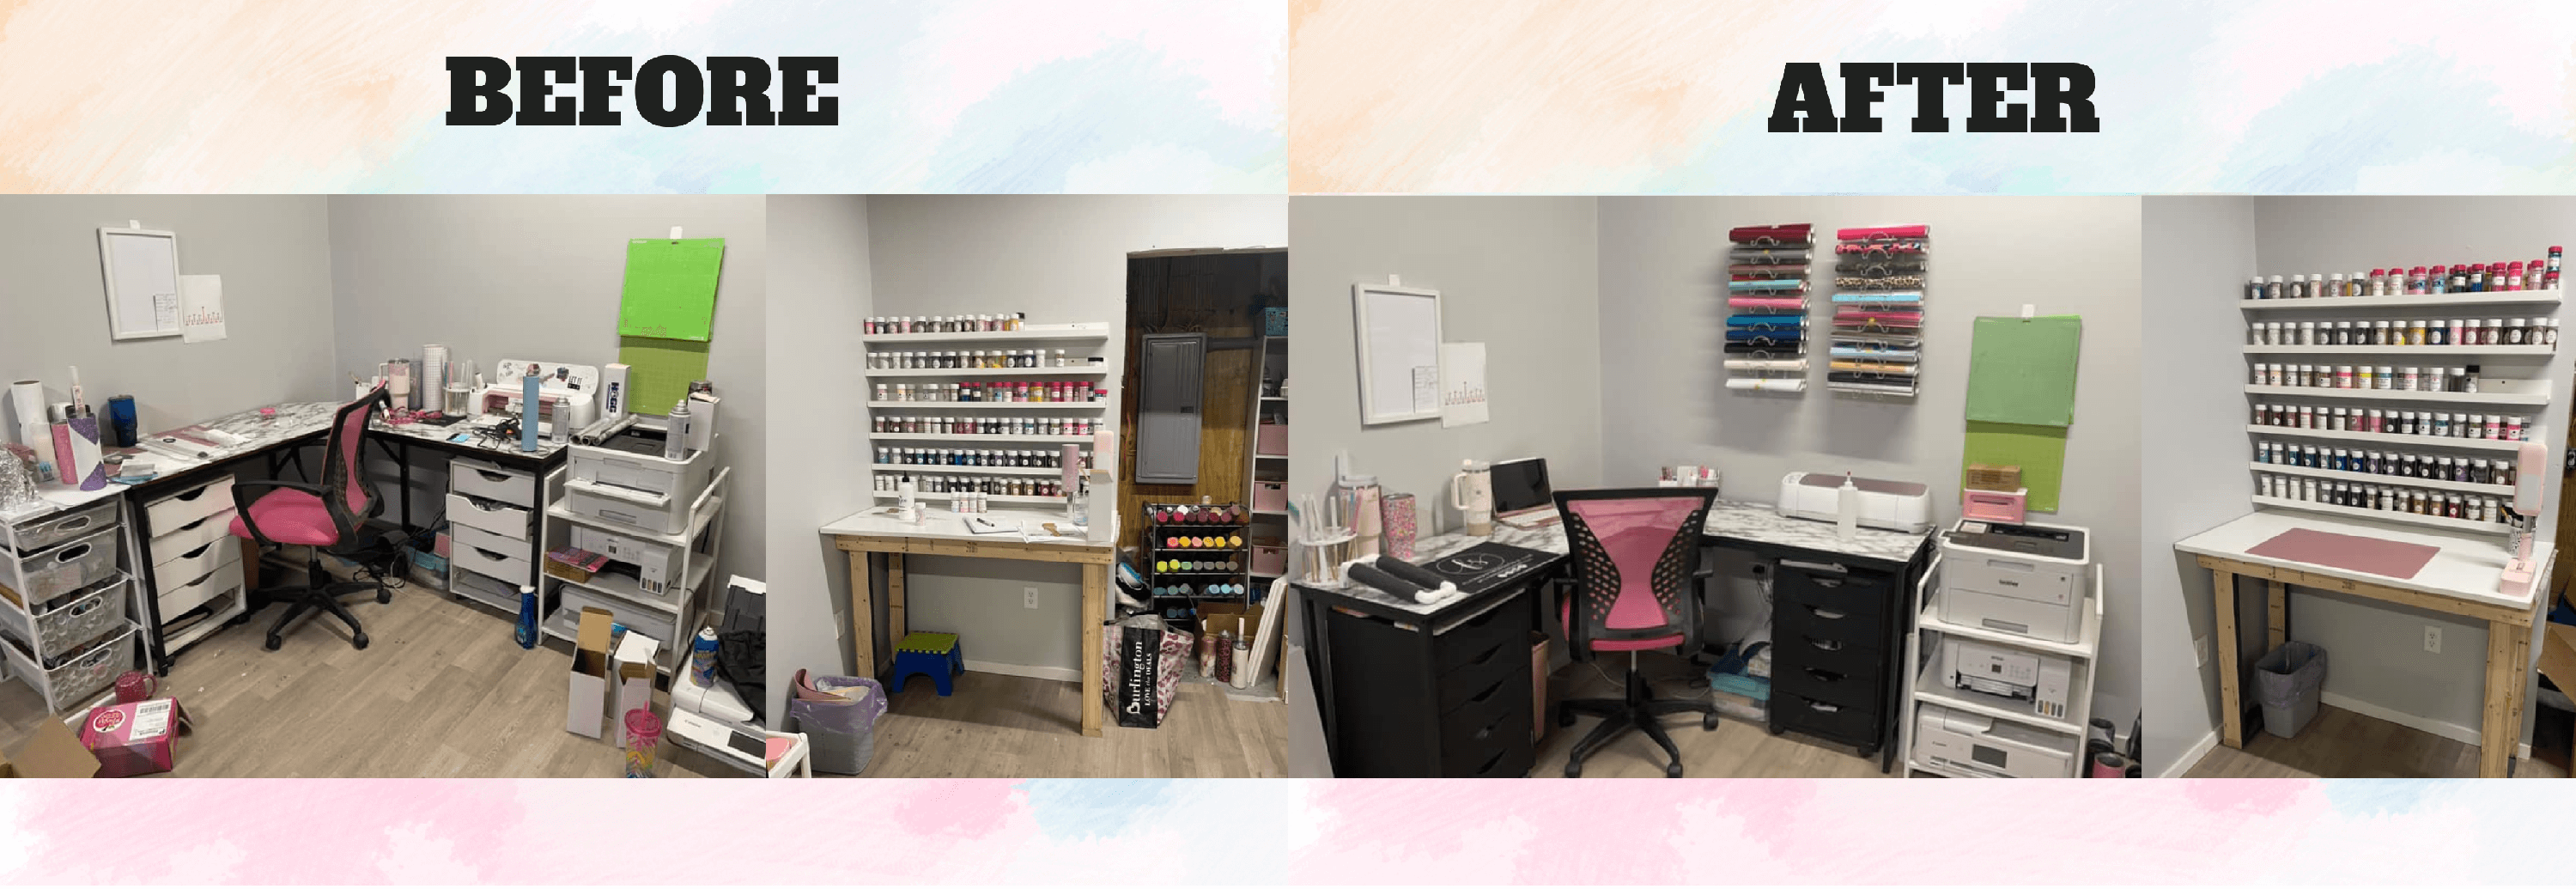 craft room space before and after